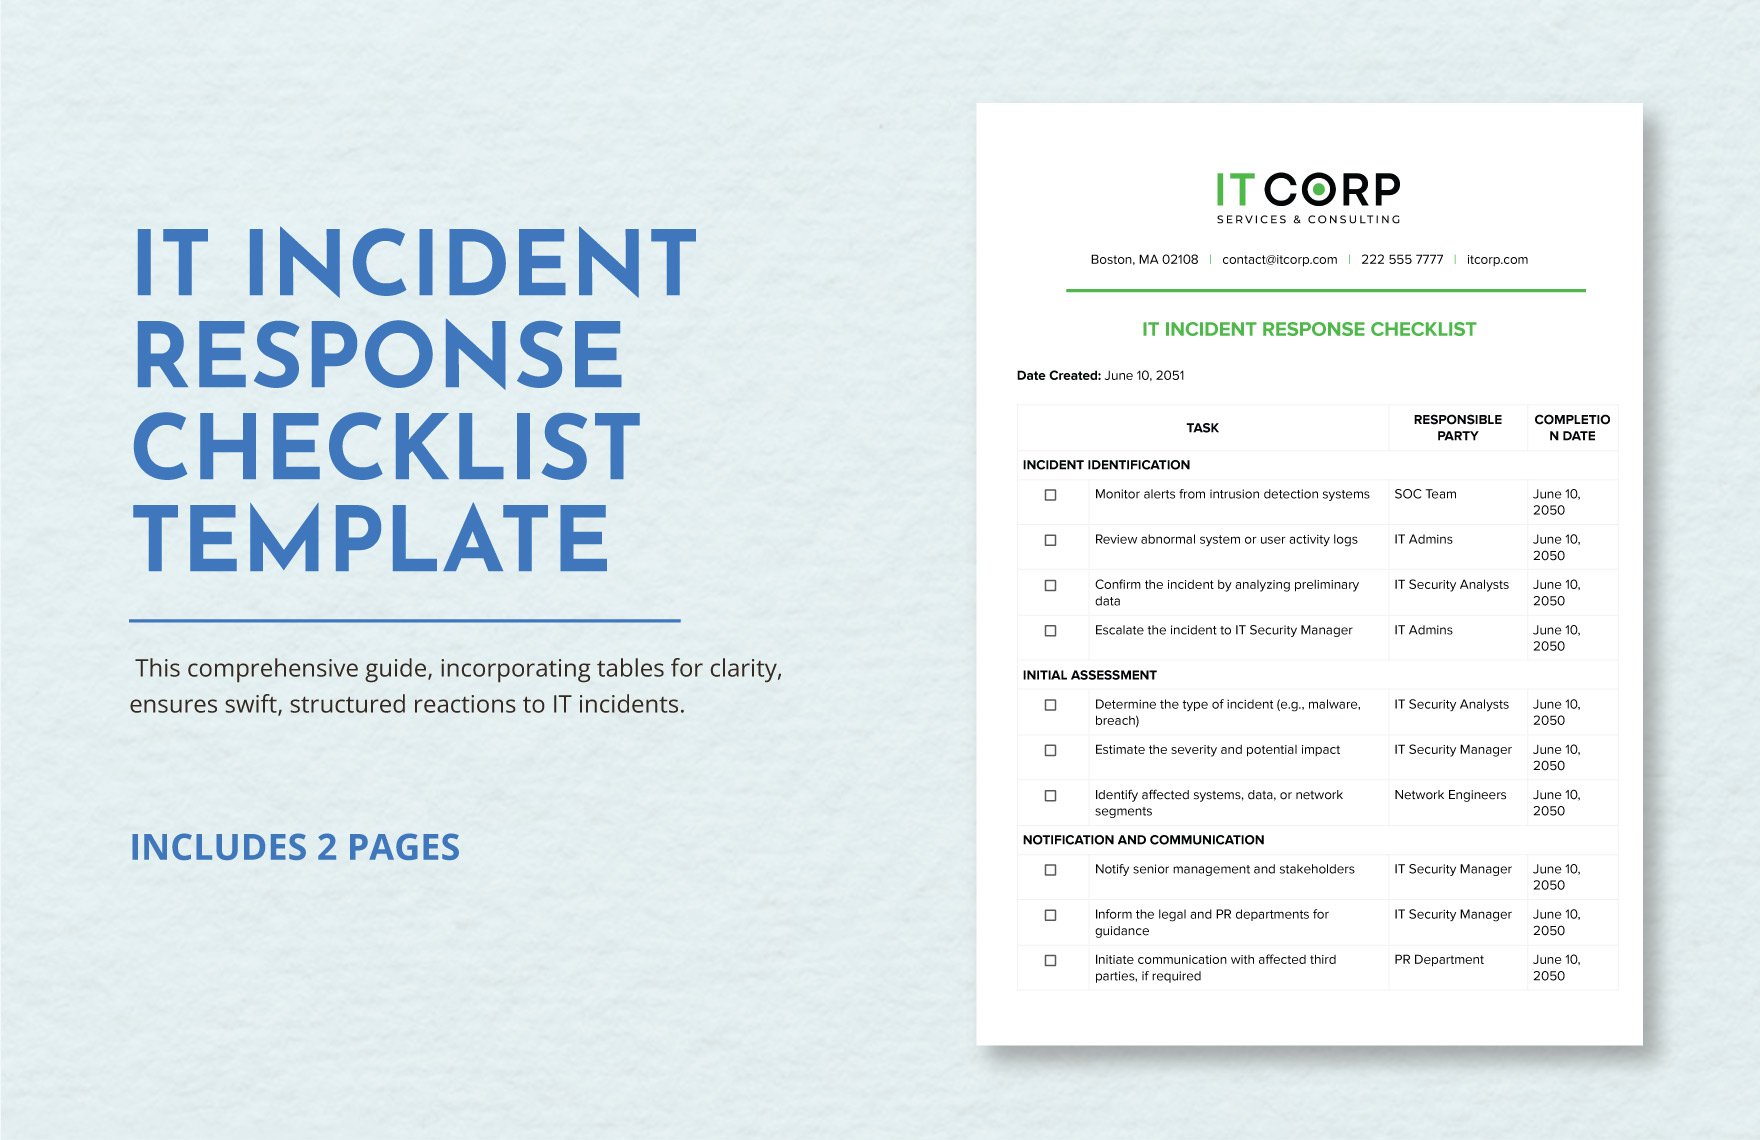 IT Incident Response Checklist Template in Word, Google Docs, PDF